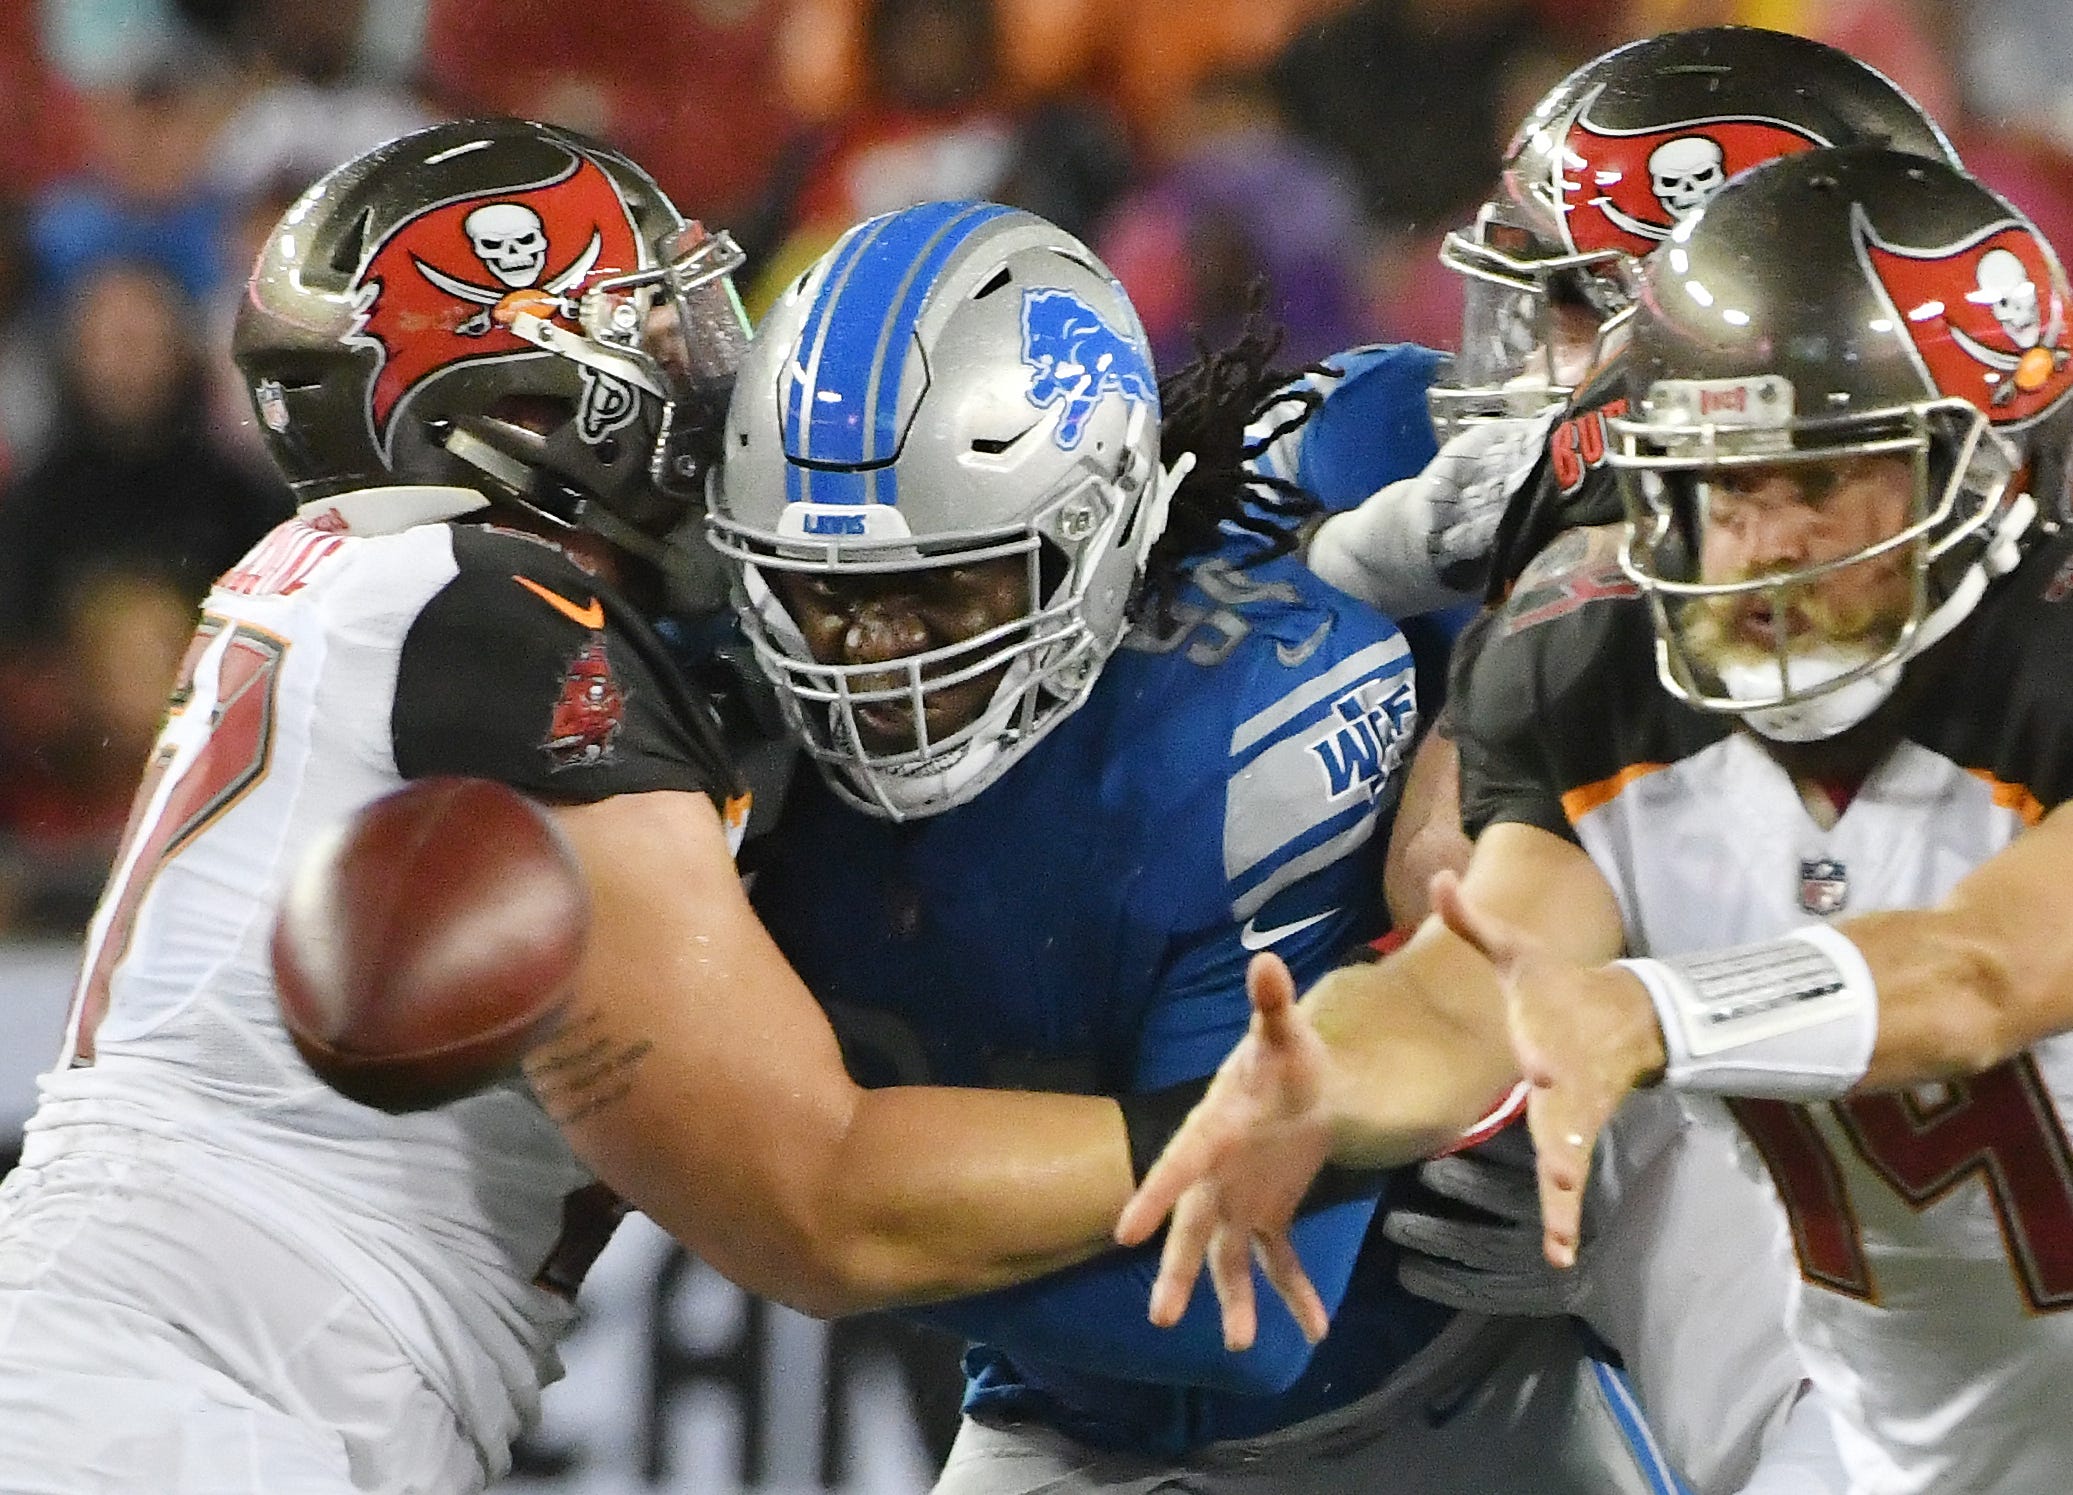 Defensive end Ziggy Ansah is fourth in Lions' history with 48 career sacks.